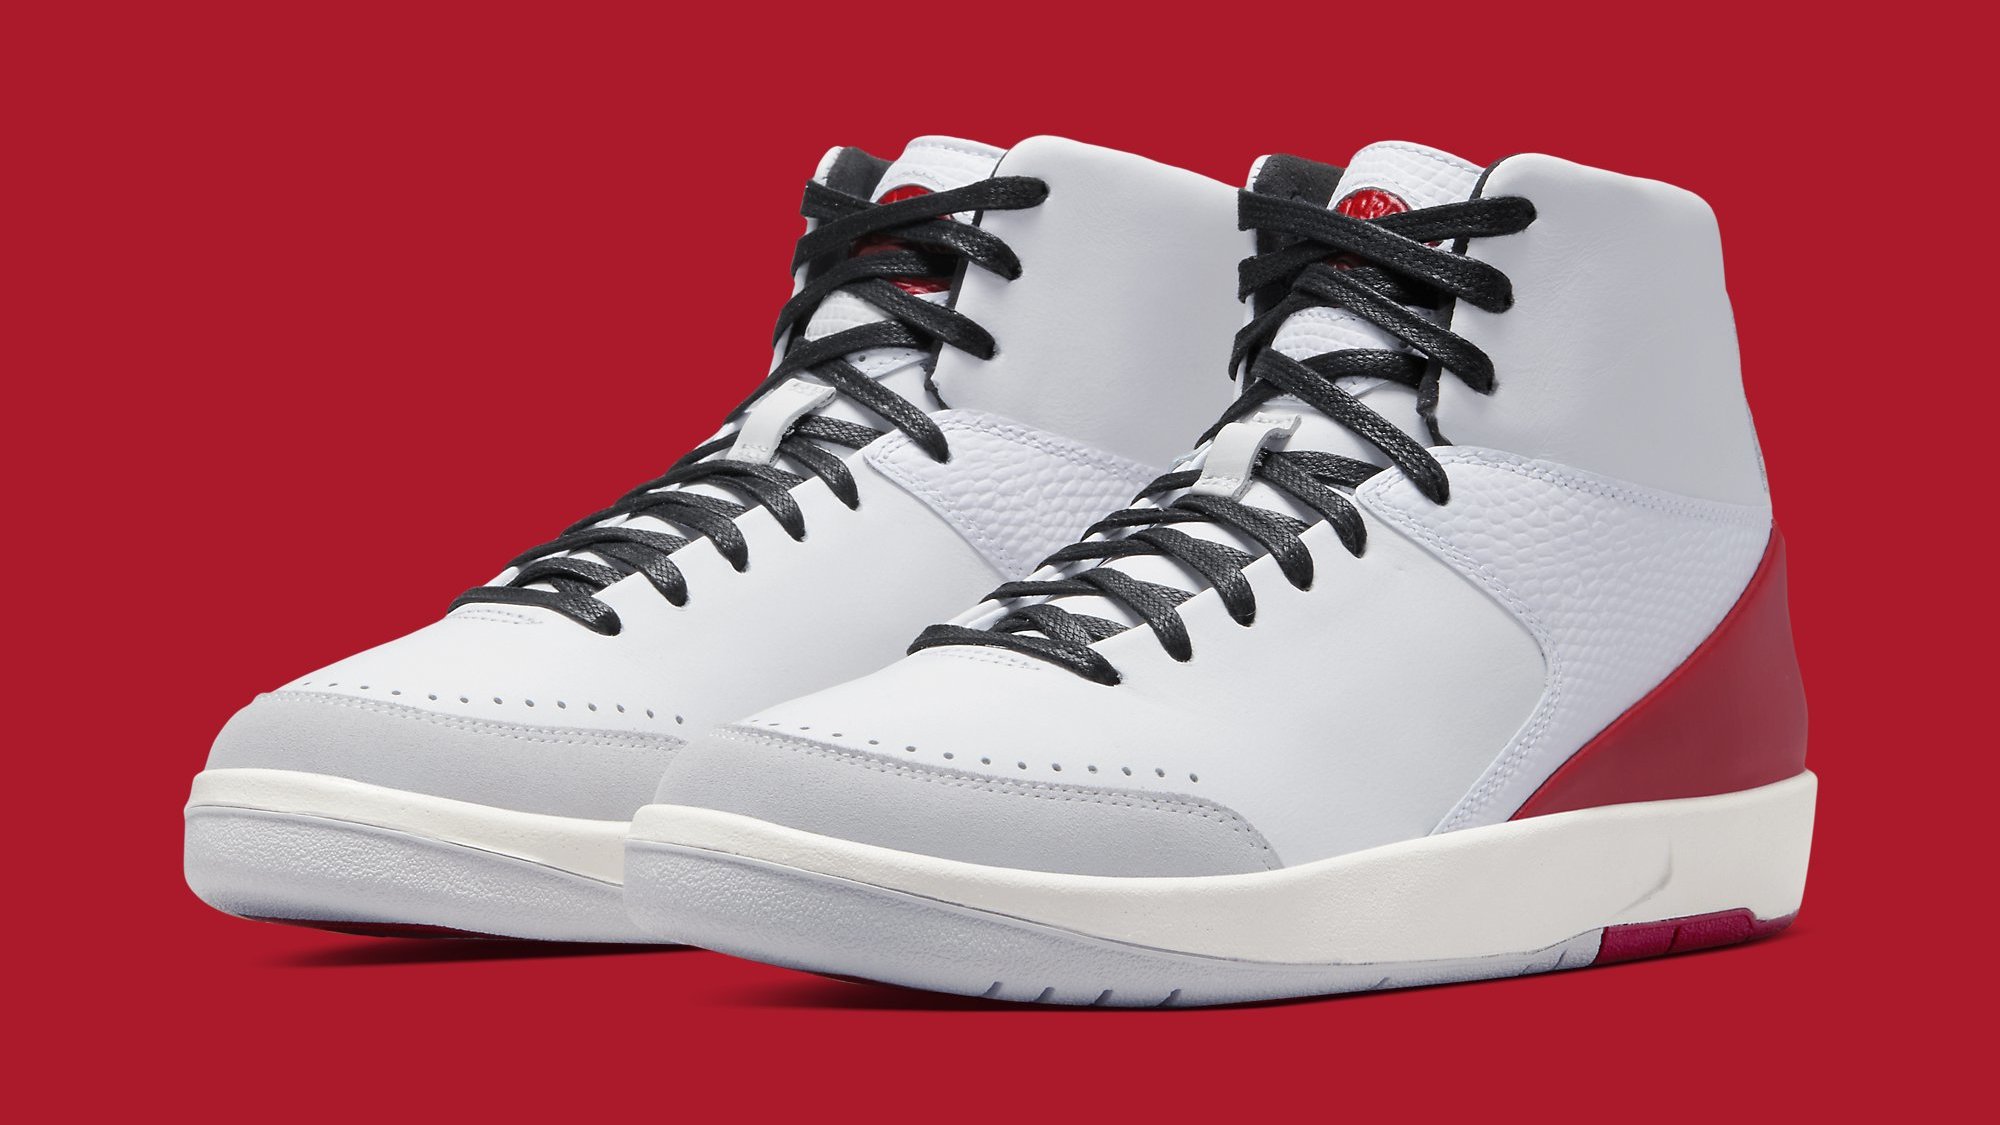 Nina Chanel Abney's Air Jordan 2 Collabs Drop in July | Complex